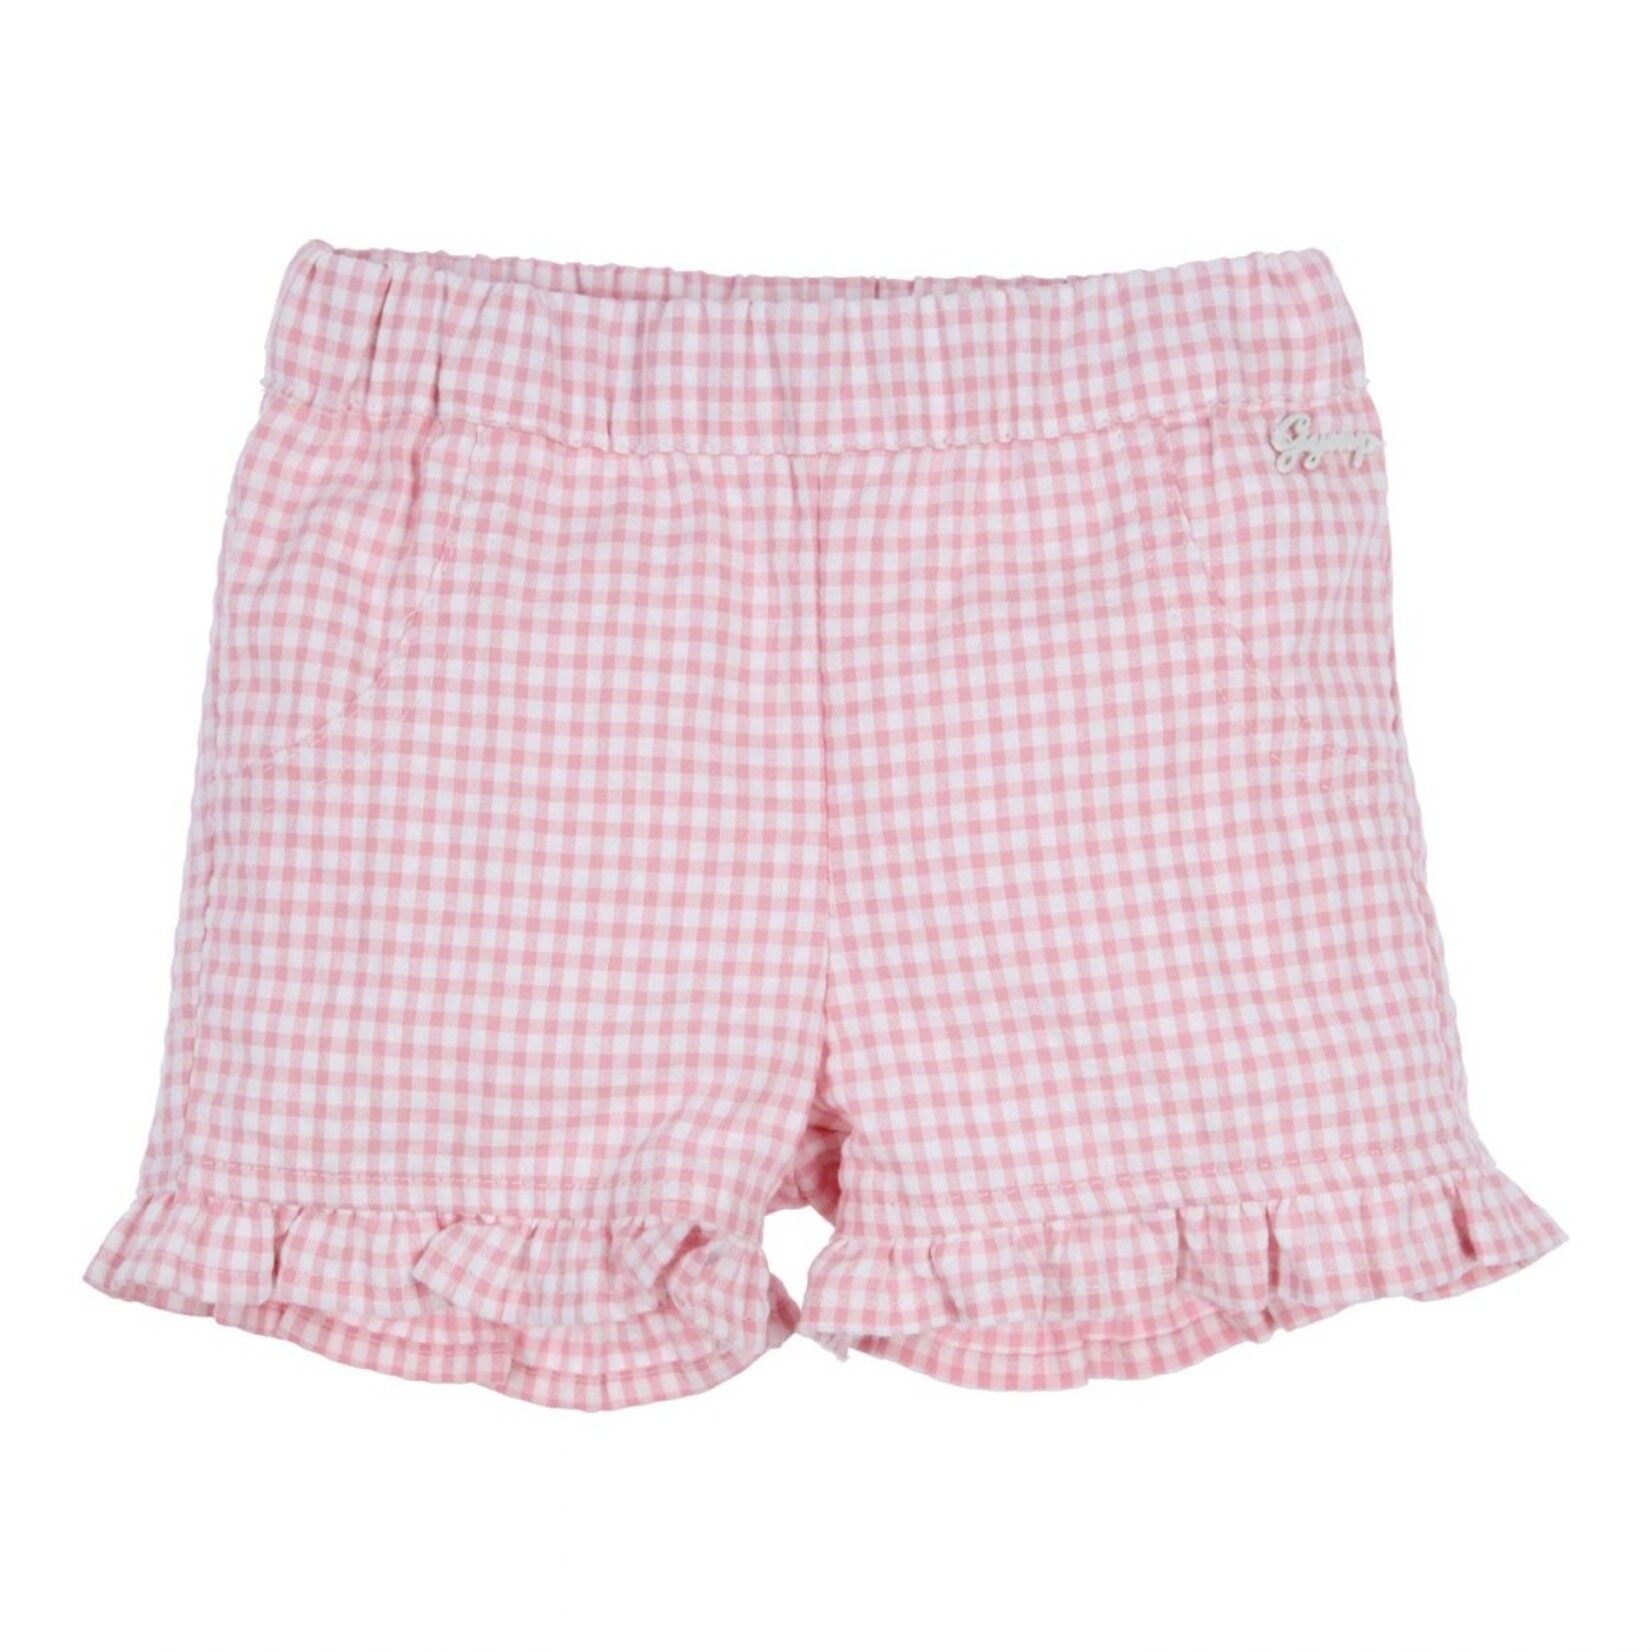 Gymp Shorts Vanity_Old Rose - Off White_24